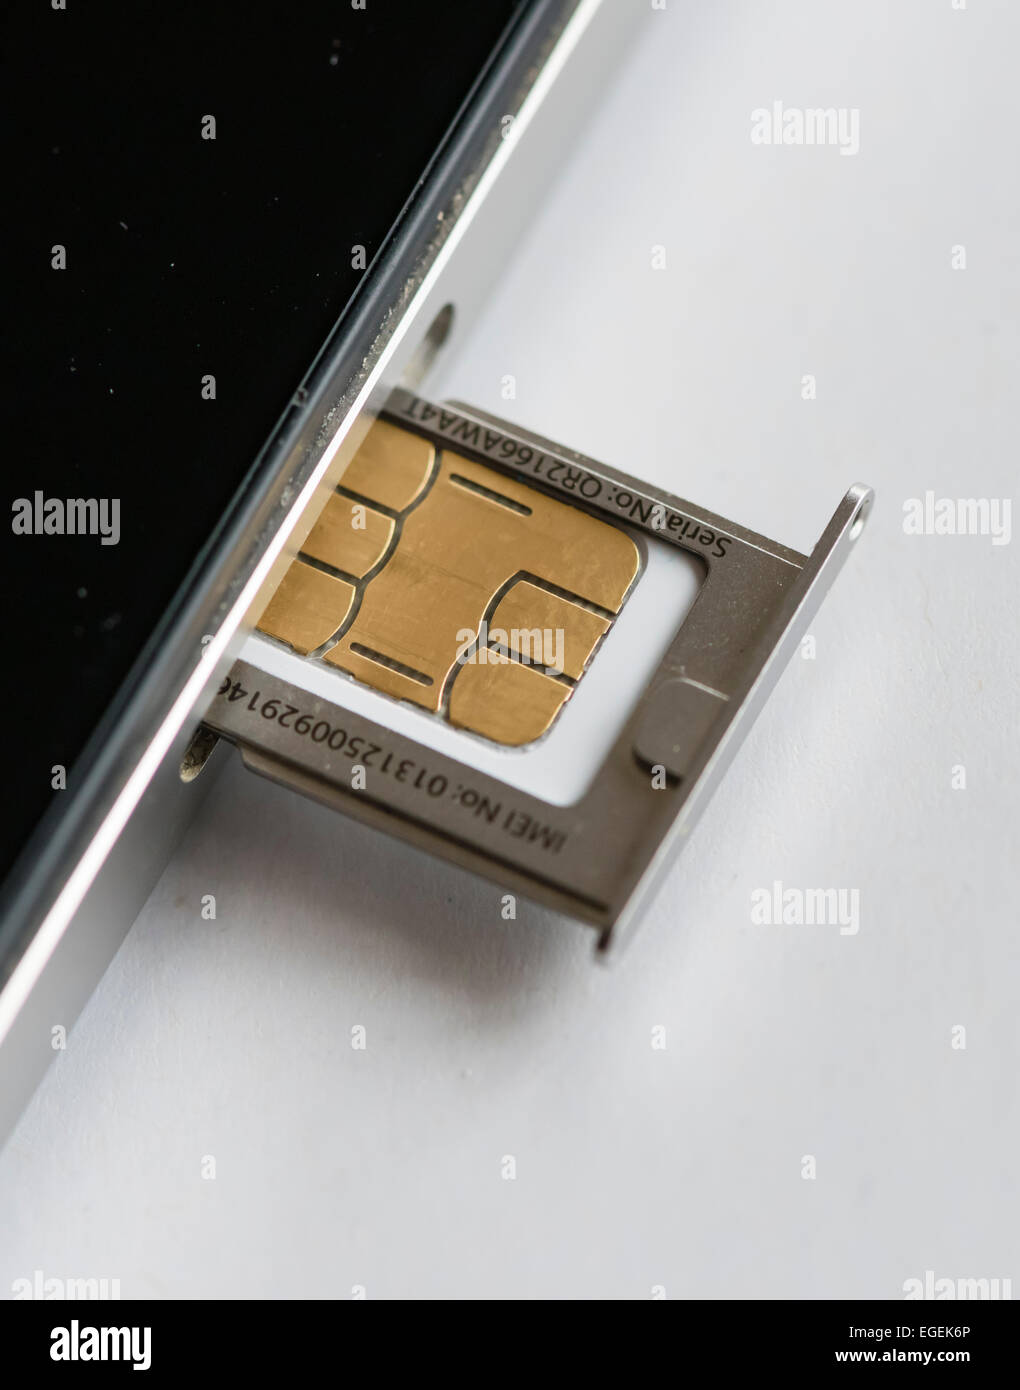 A micro SIM-card is inserted into an Apple iphone 4 smartphone. Stock Photo